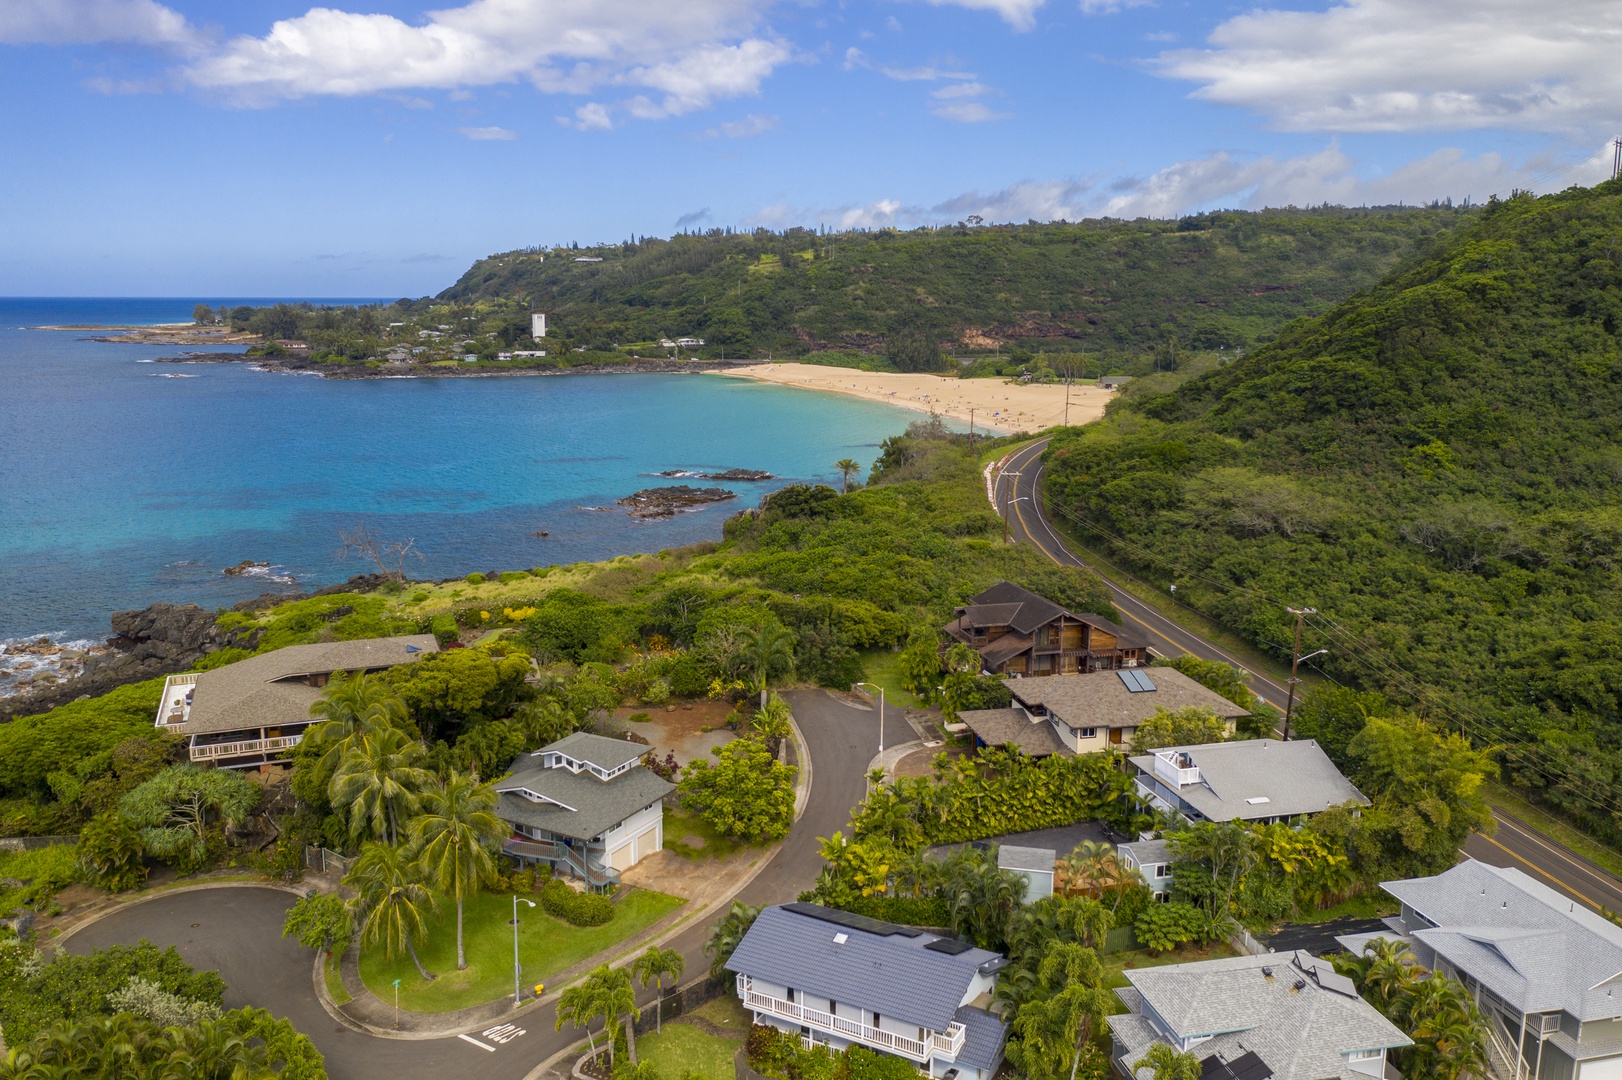 Haleiwa Vacation Rentals, Waimea Dream - The property is located in a cul-de-sac on a quiet, private street.